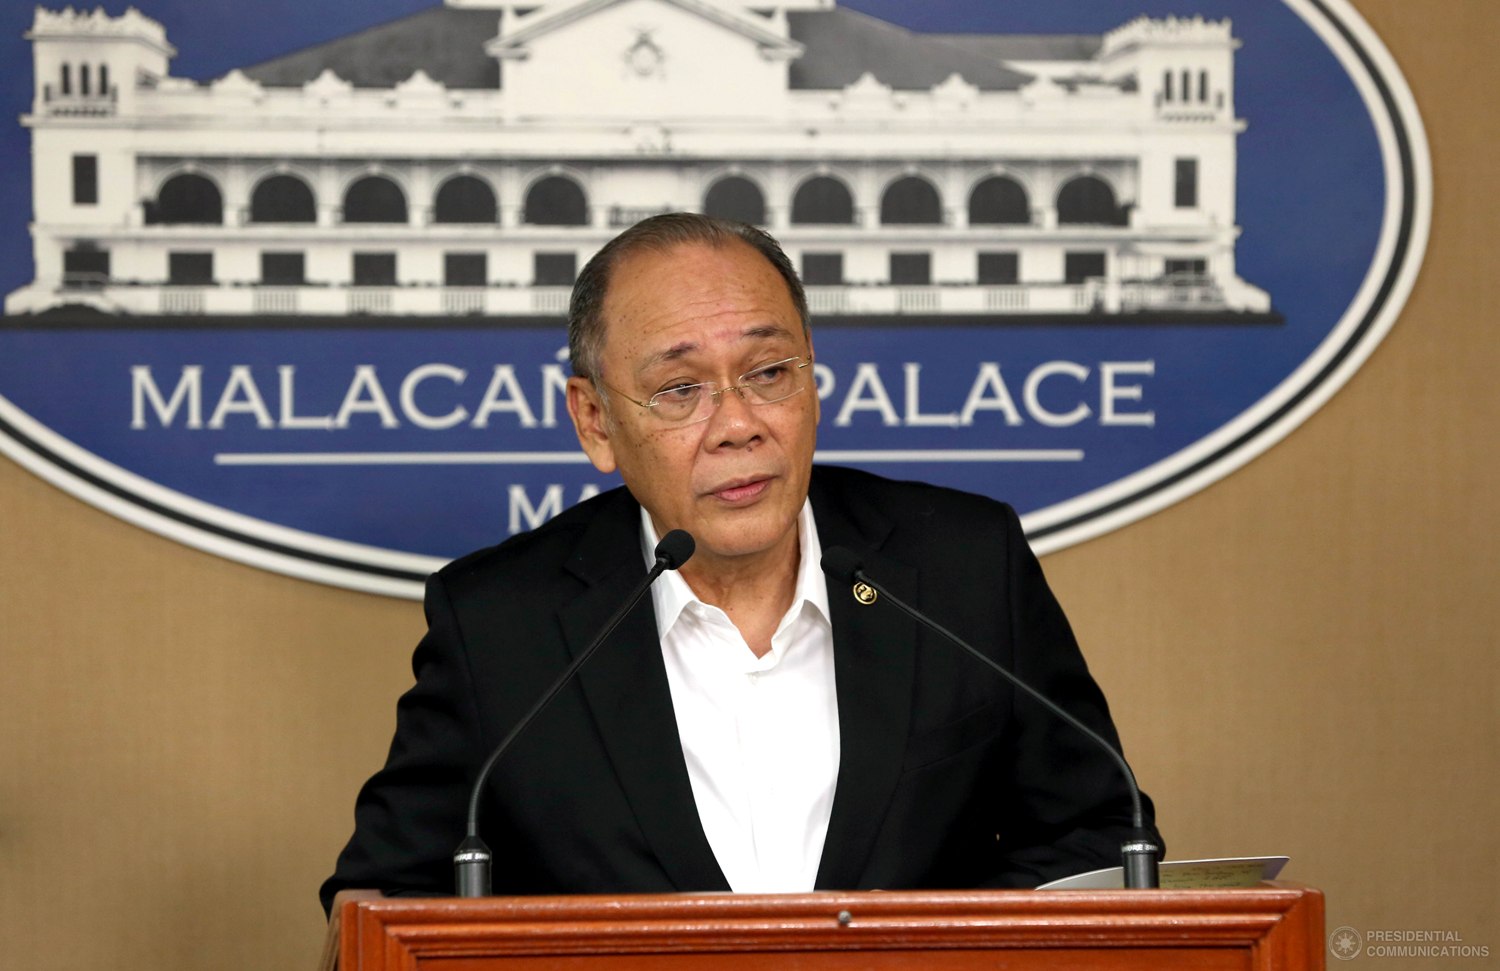 â��No Rody order to stop peace talks with Redsâ��